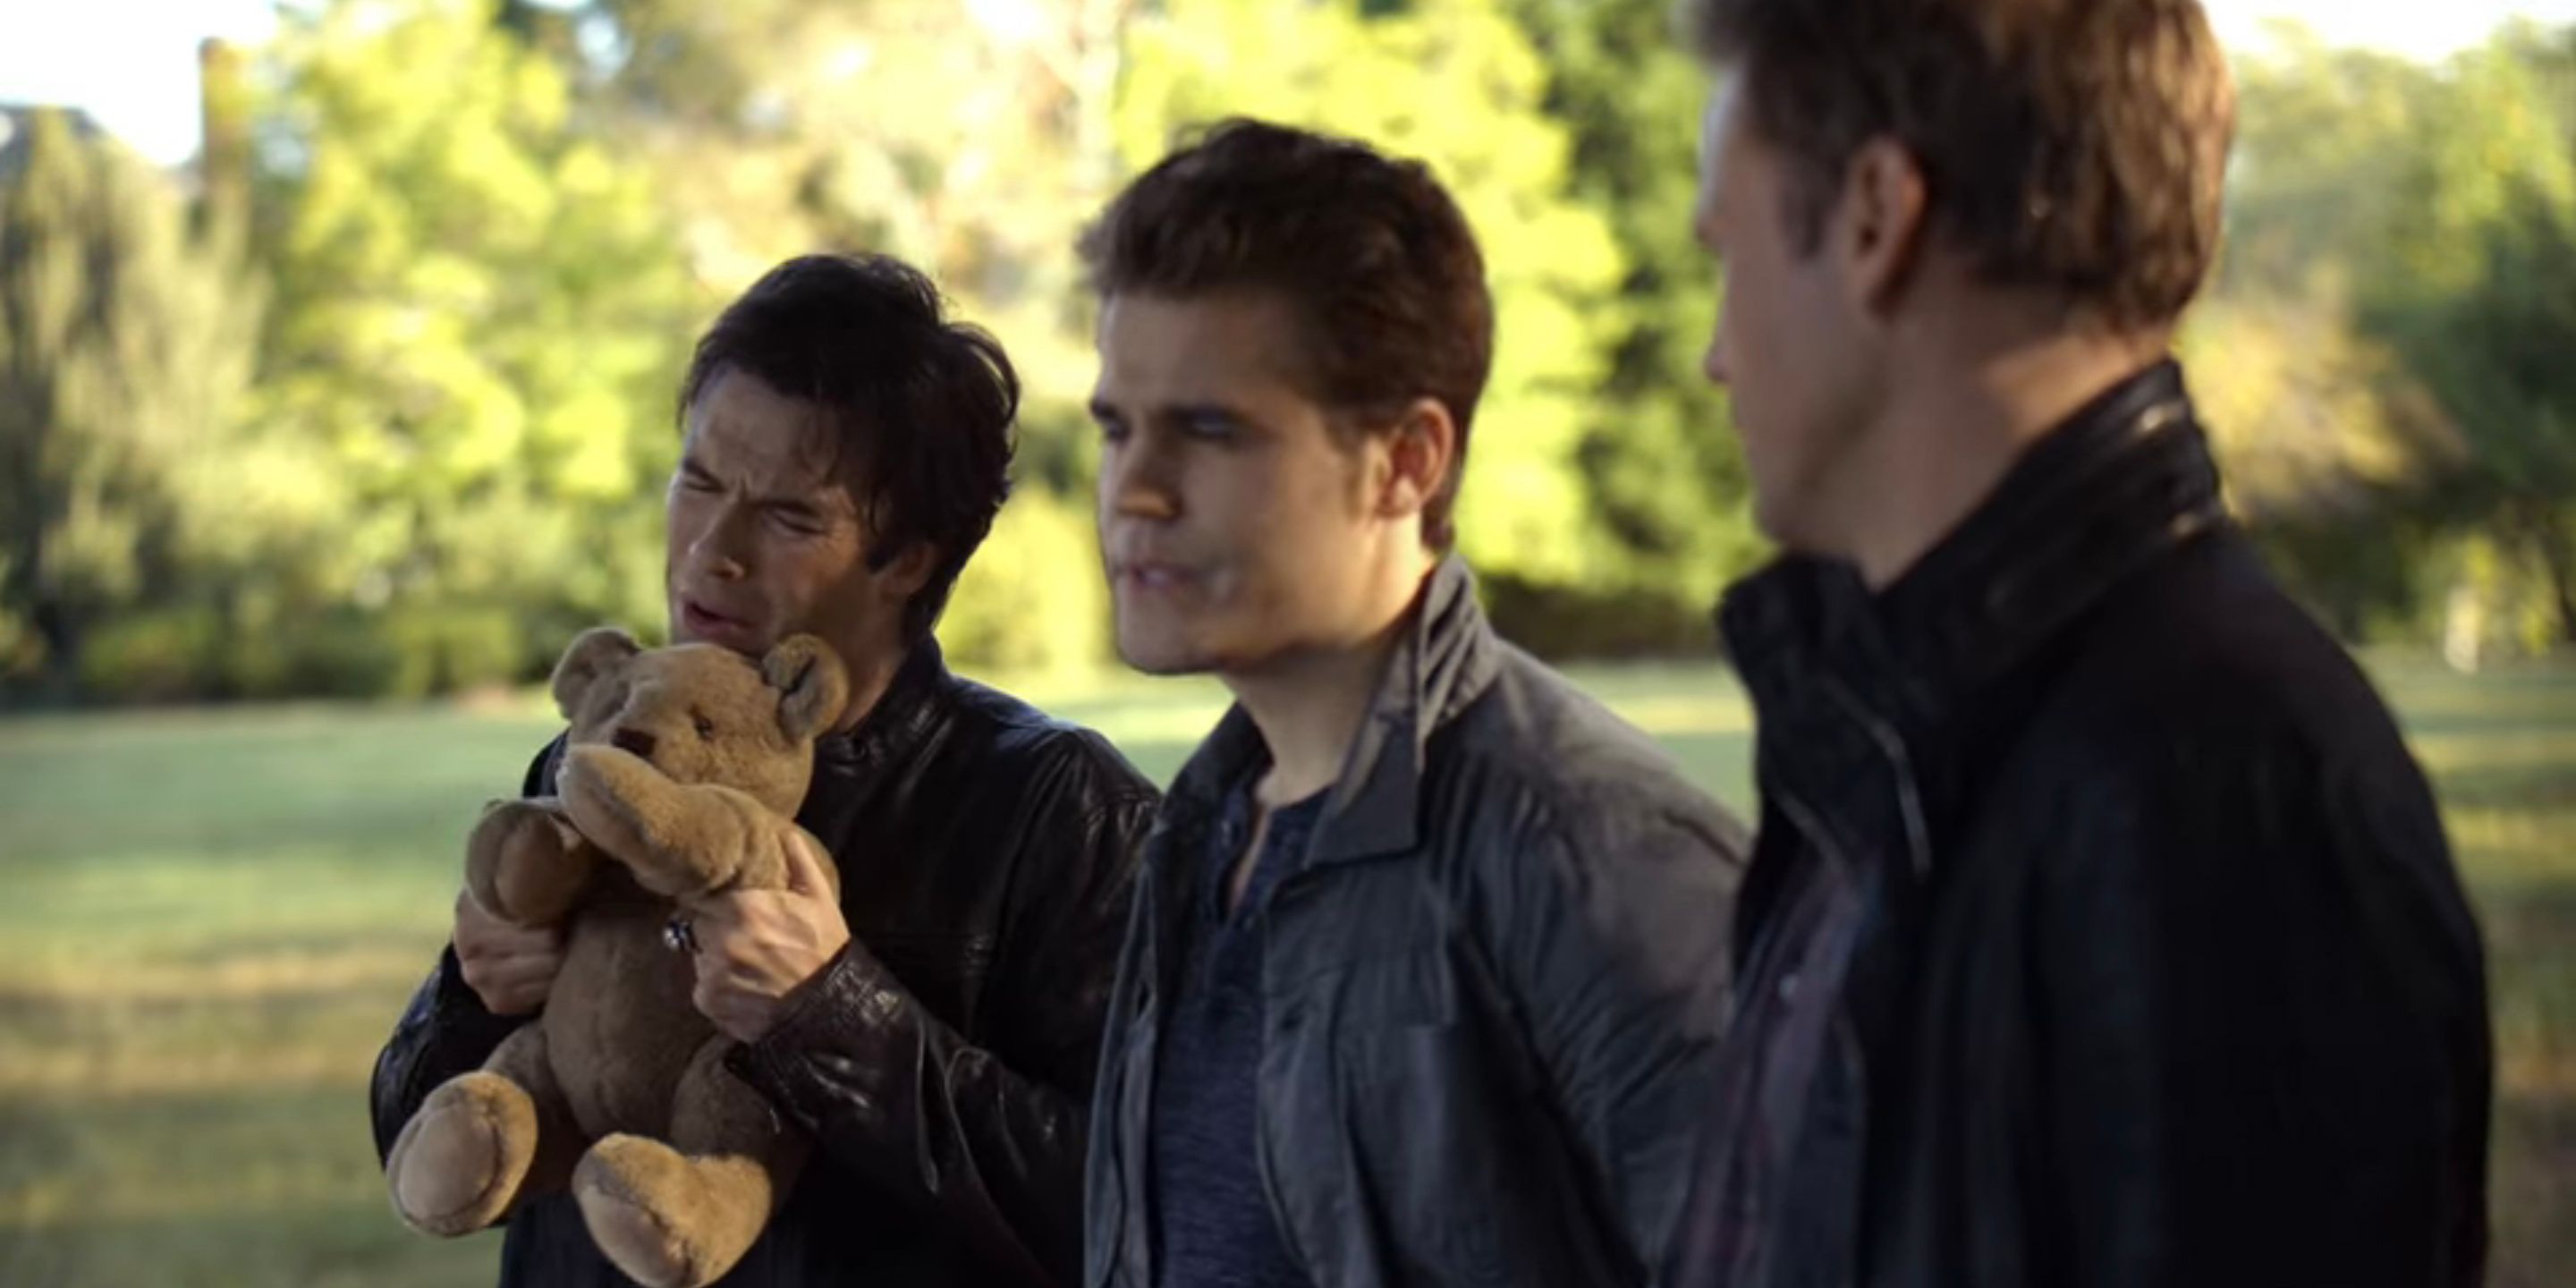 Damon with Bonnie's teddy bear in The Vampire Diaries.